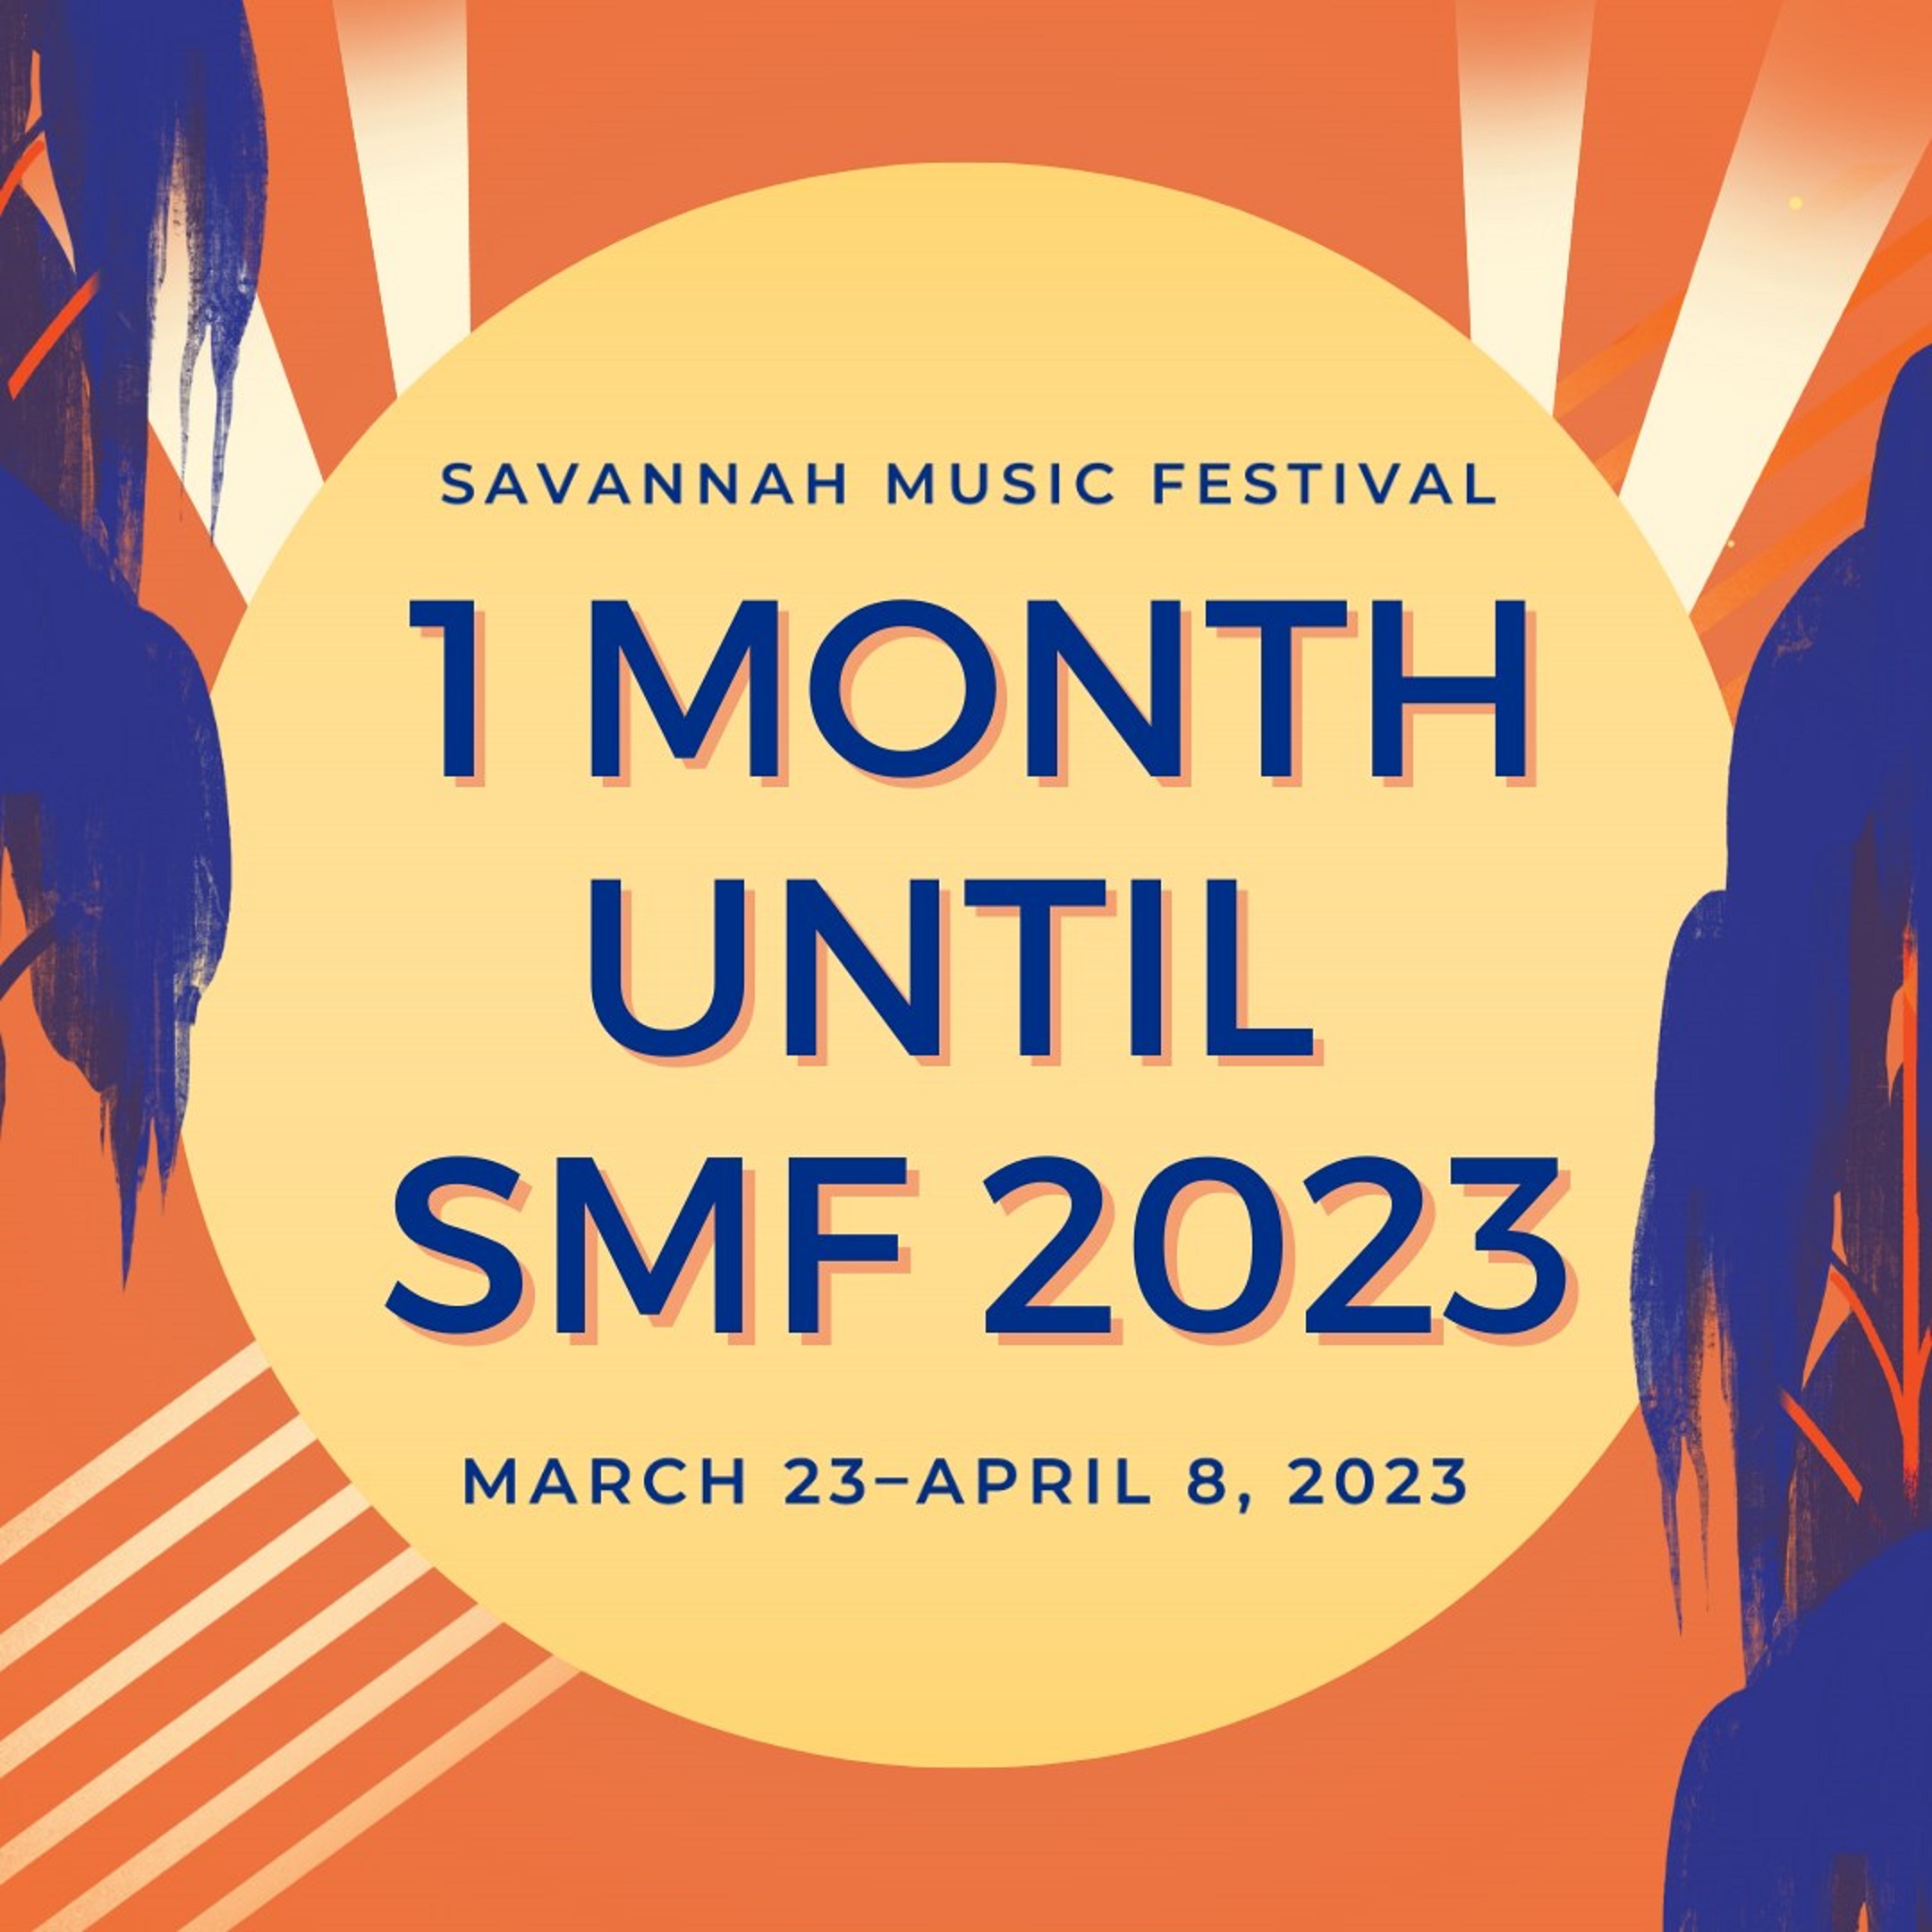 Savannah Music Festival Gears Up for Unprecedented 2023 Event with Expanded Outdoor Main Stage at Trustees’ Garden